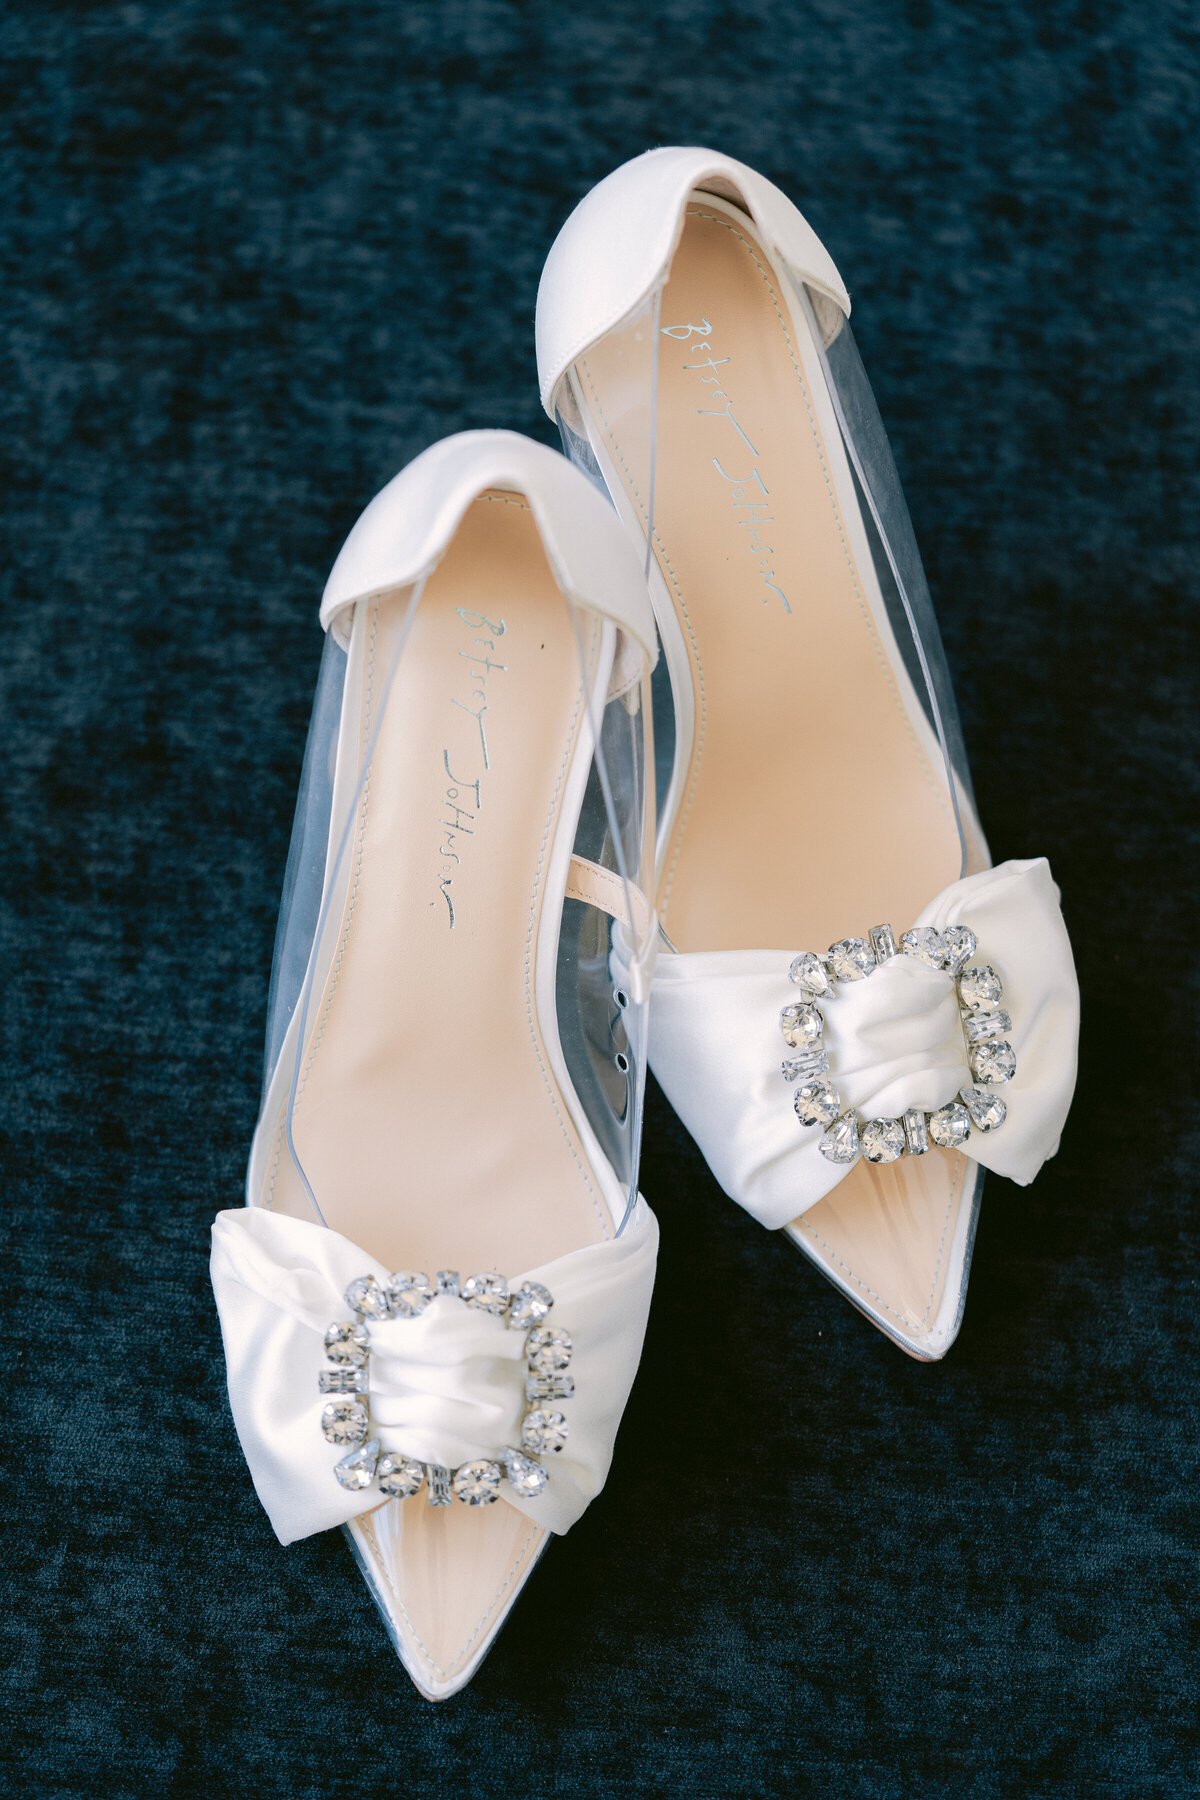 Bridal shoes with square crystals